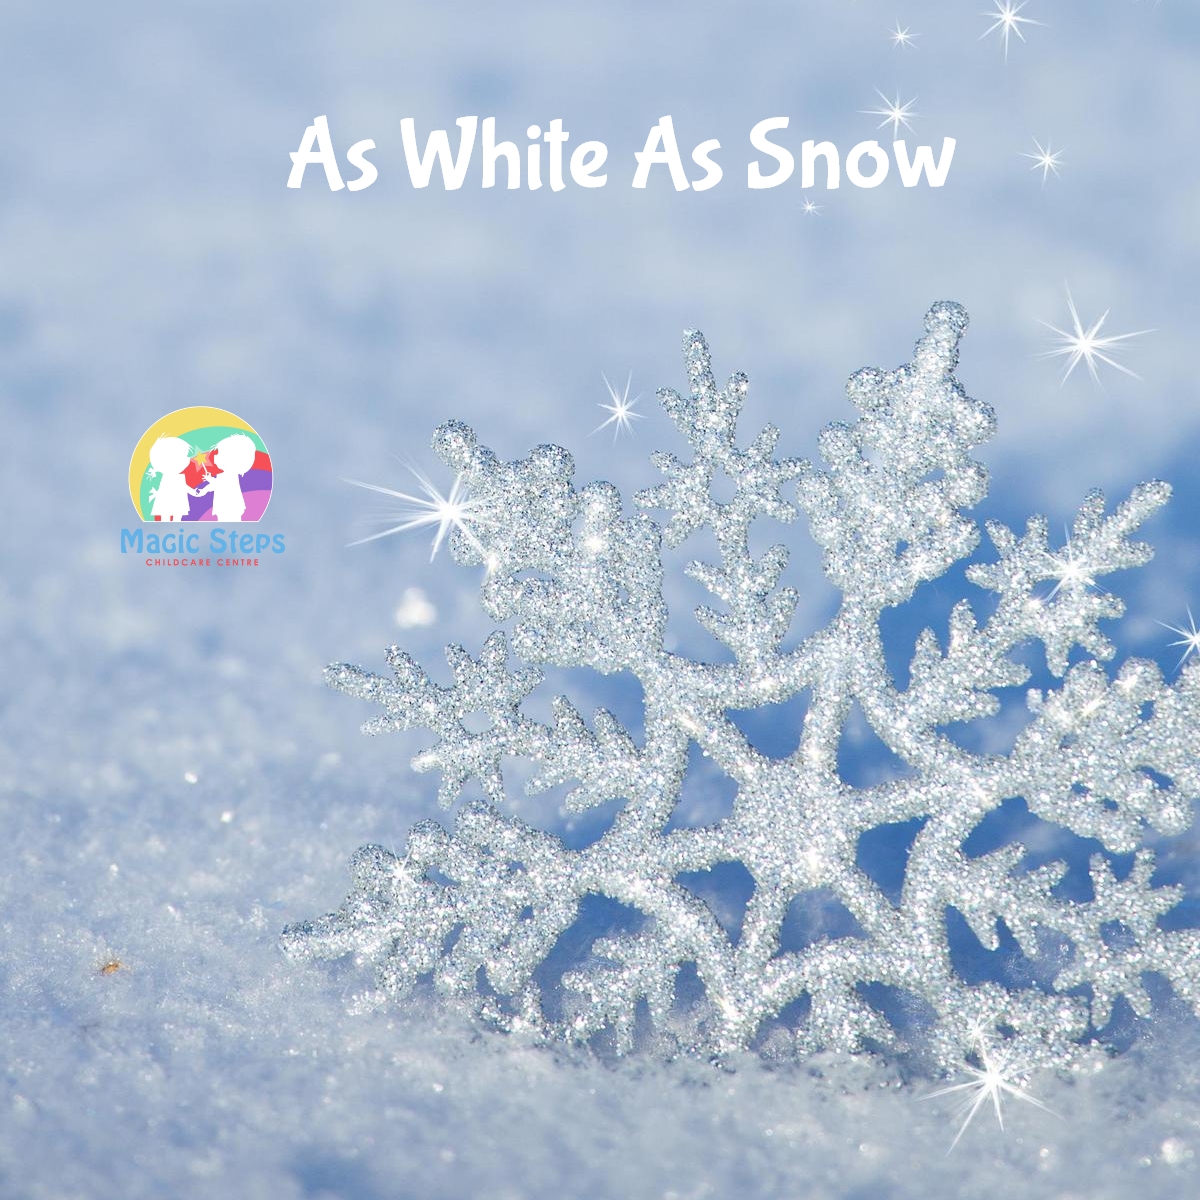 As white as Snow- Wednesday 11th January